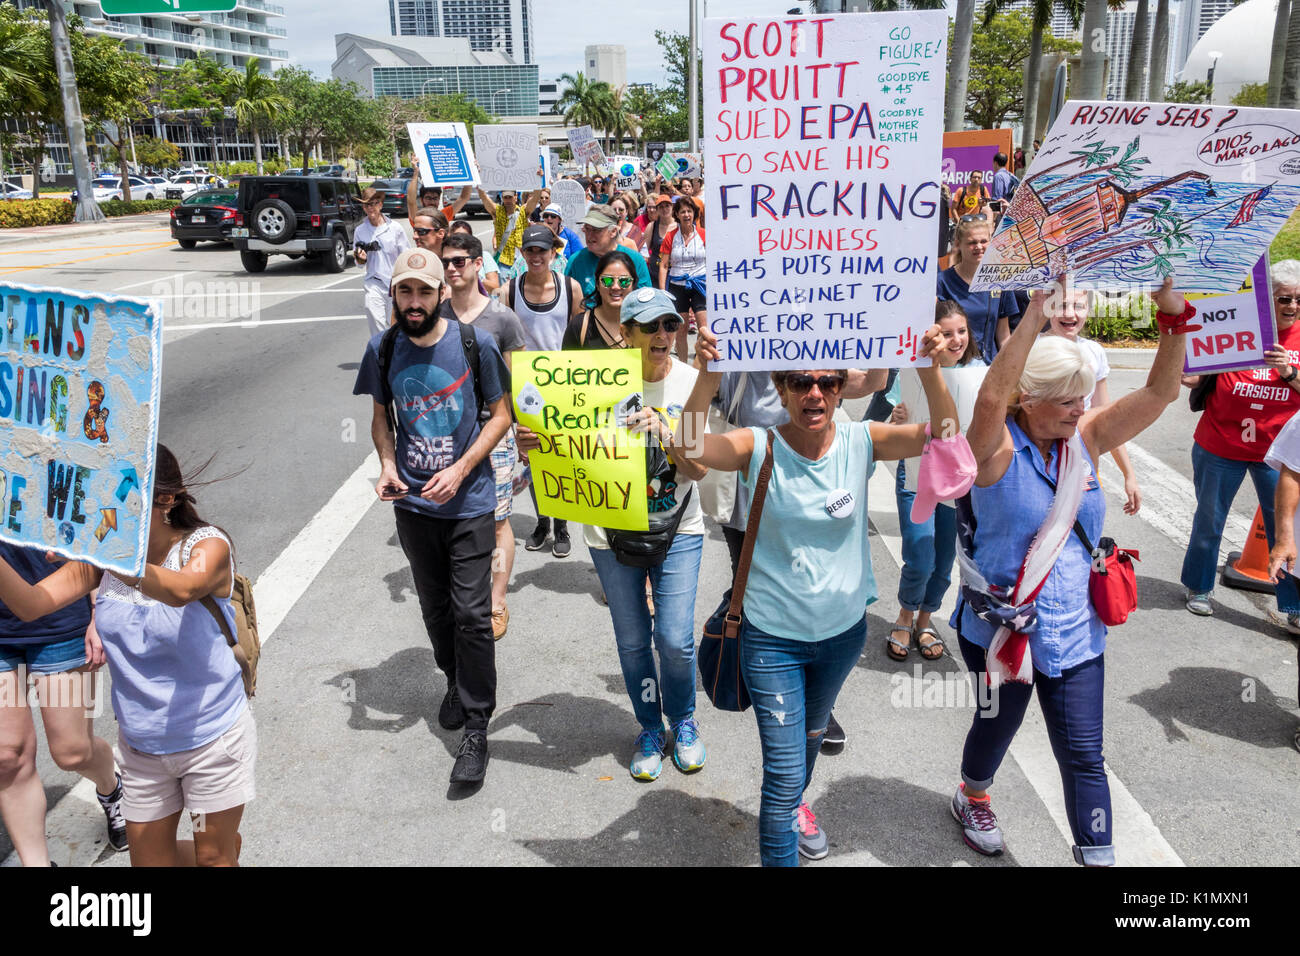 Miami Florida,Museum Park,March for Science,protest,rally,sign,protester,marching,signs,posters,FL170430165 Stock Photo